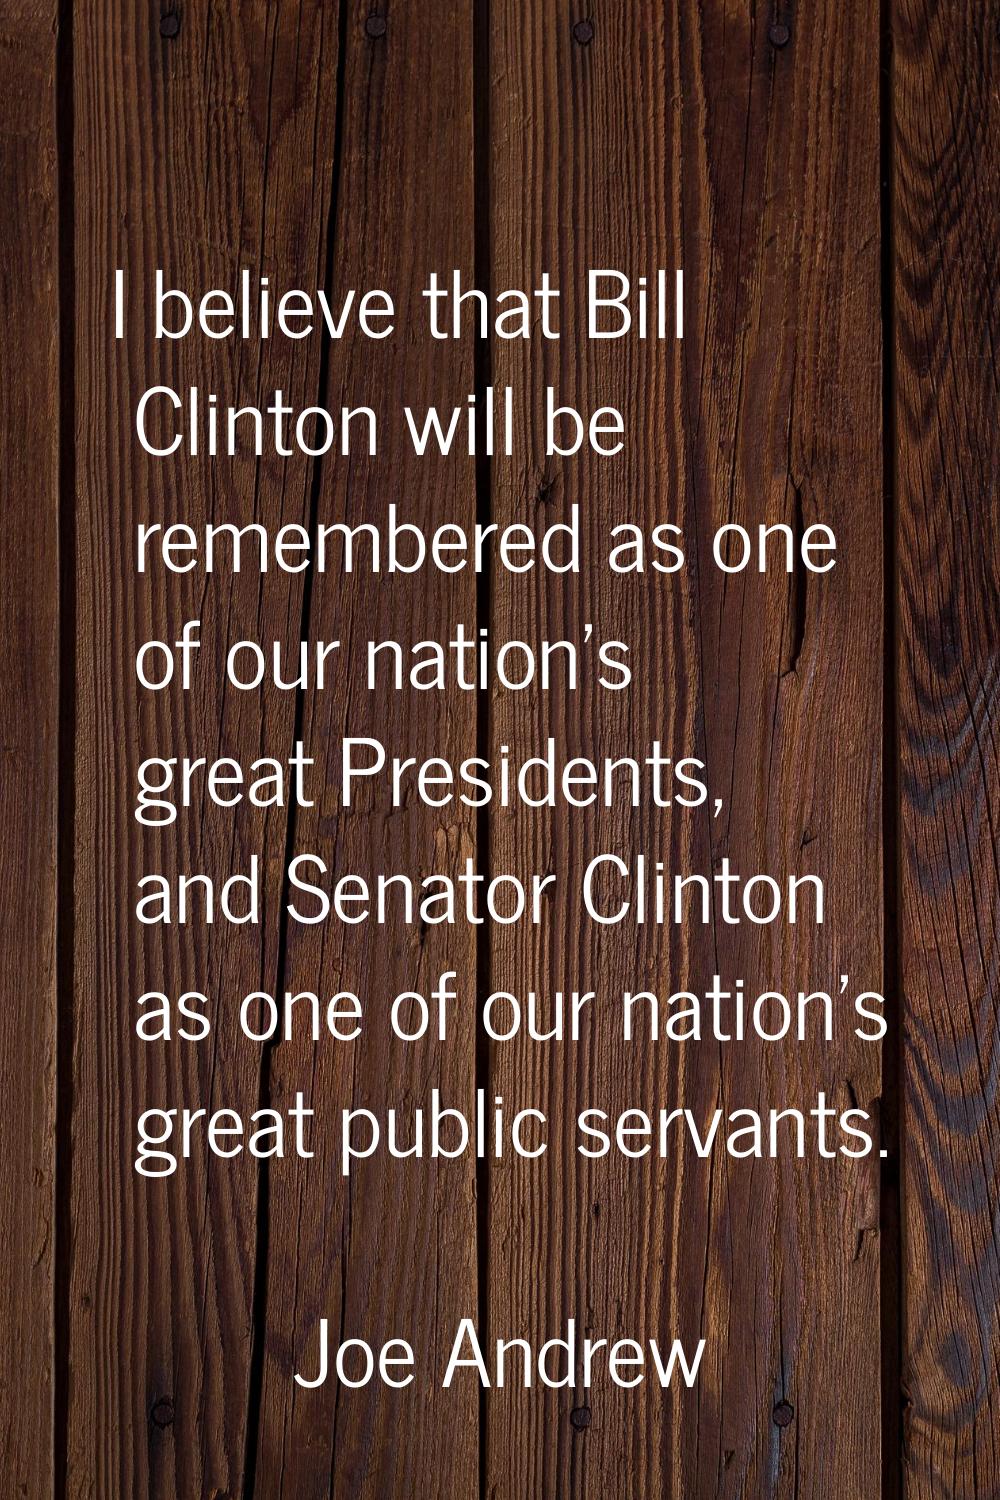 I believe that Bill Clinton will be remembered as one of our nation's great Presidents, and Senator